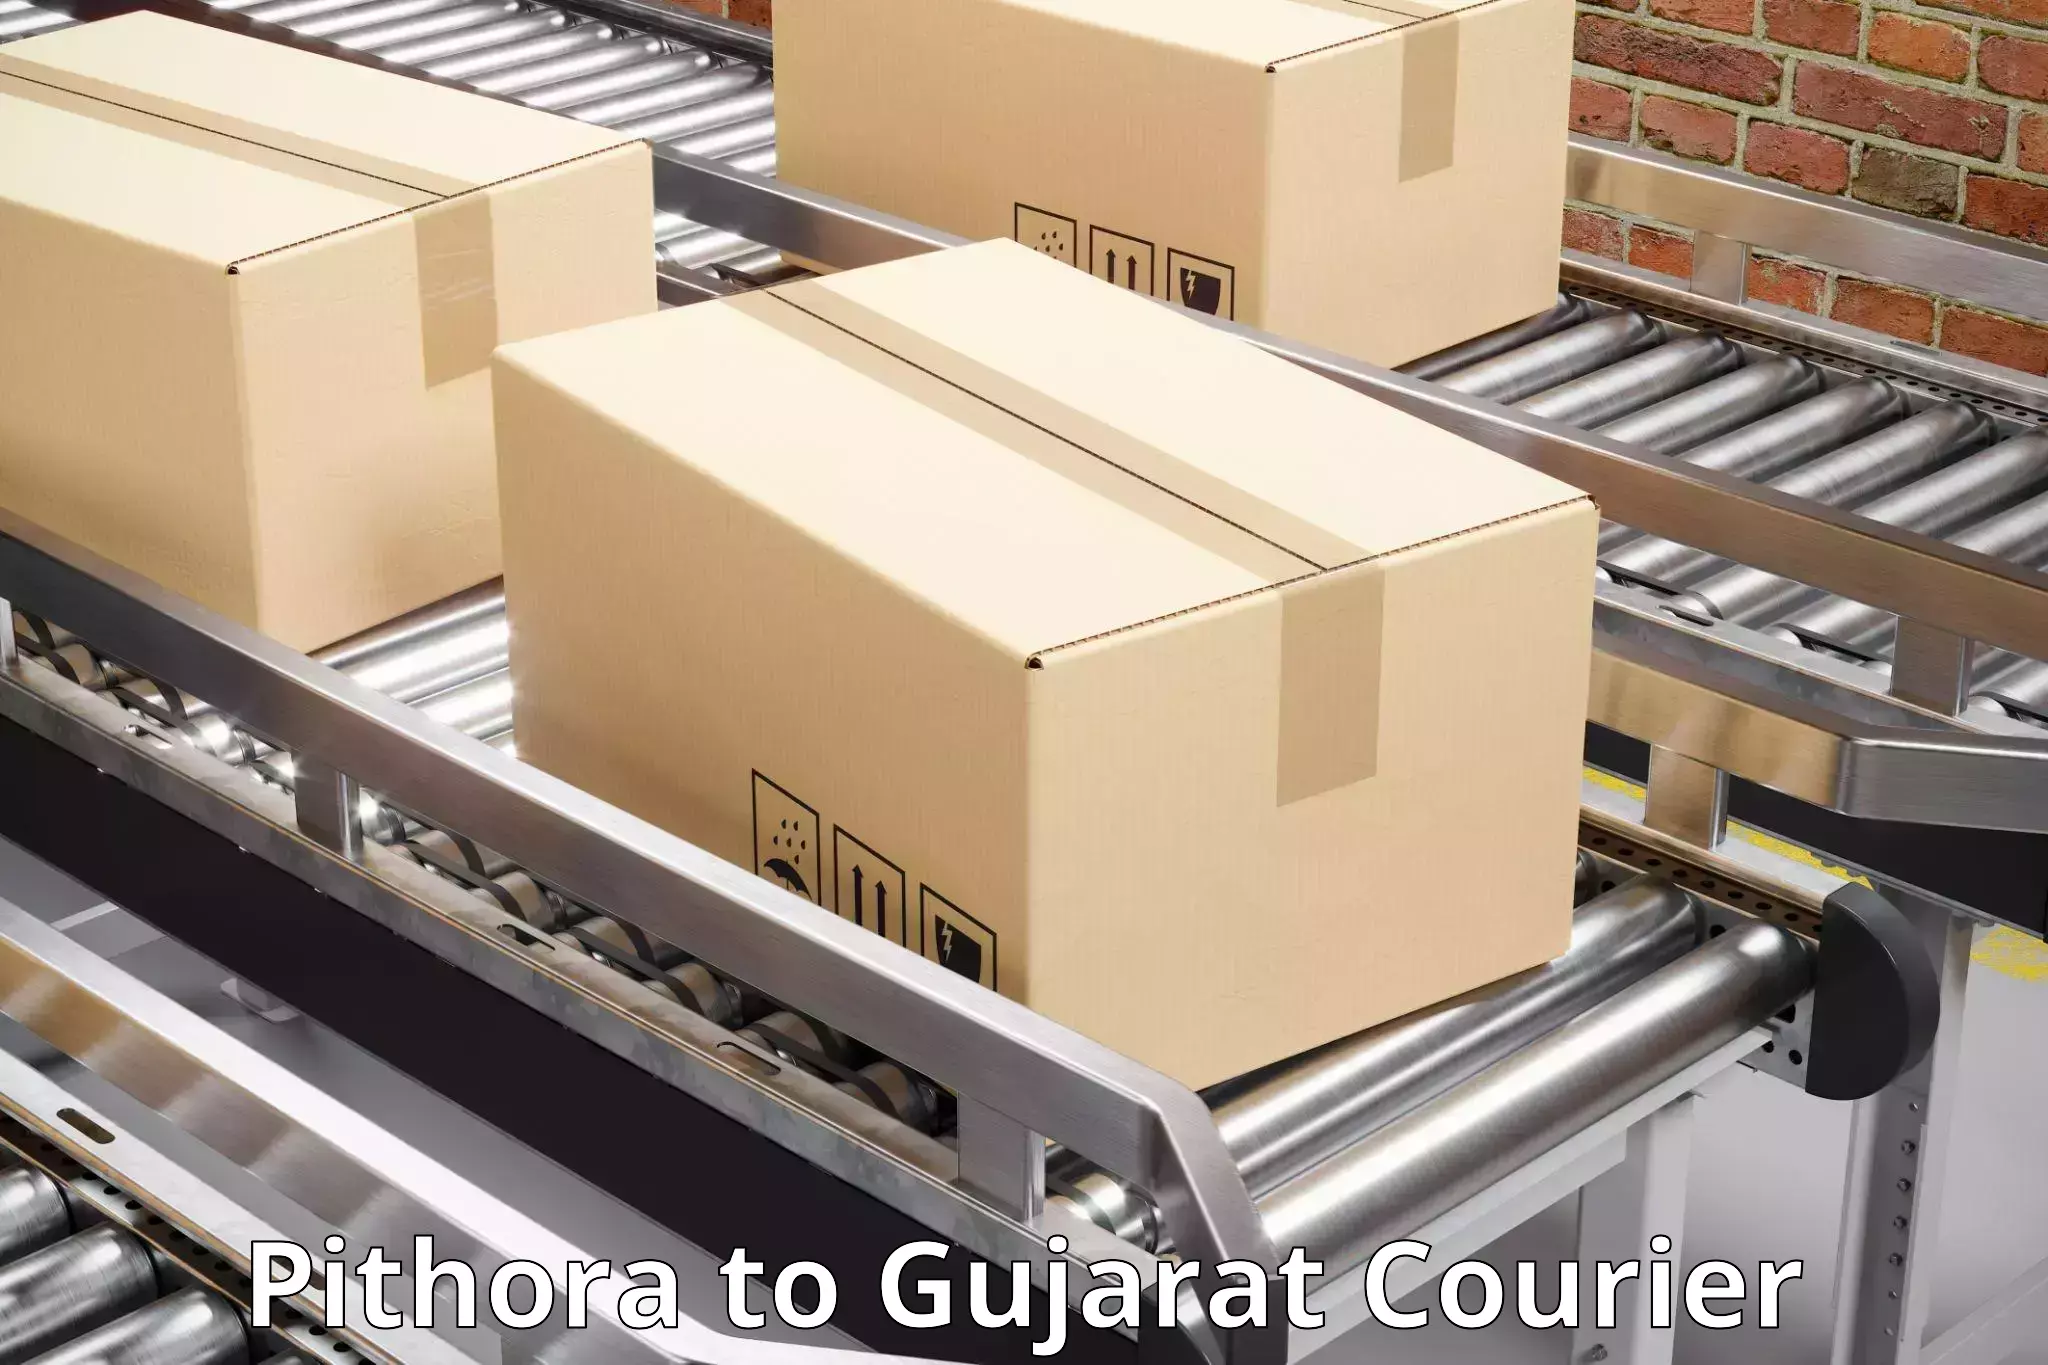 Digital shipping tools in Pithora to Dholka